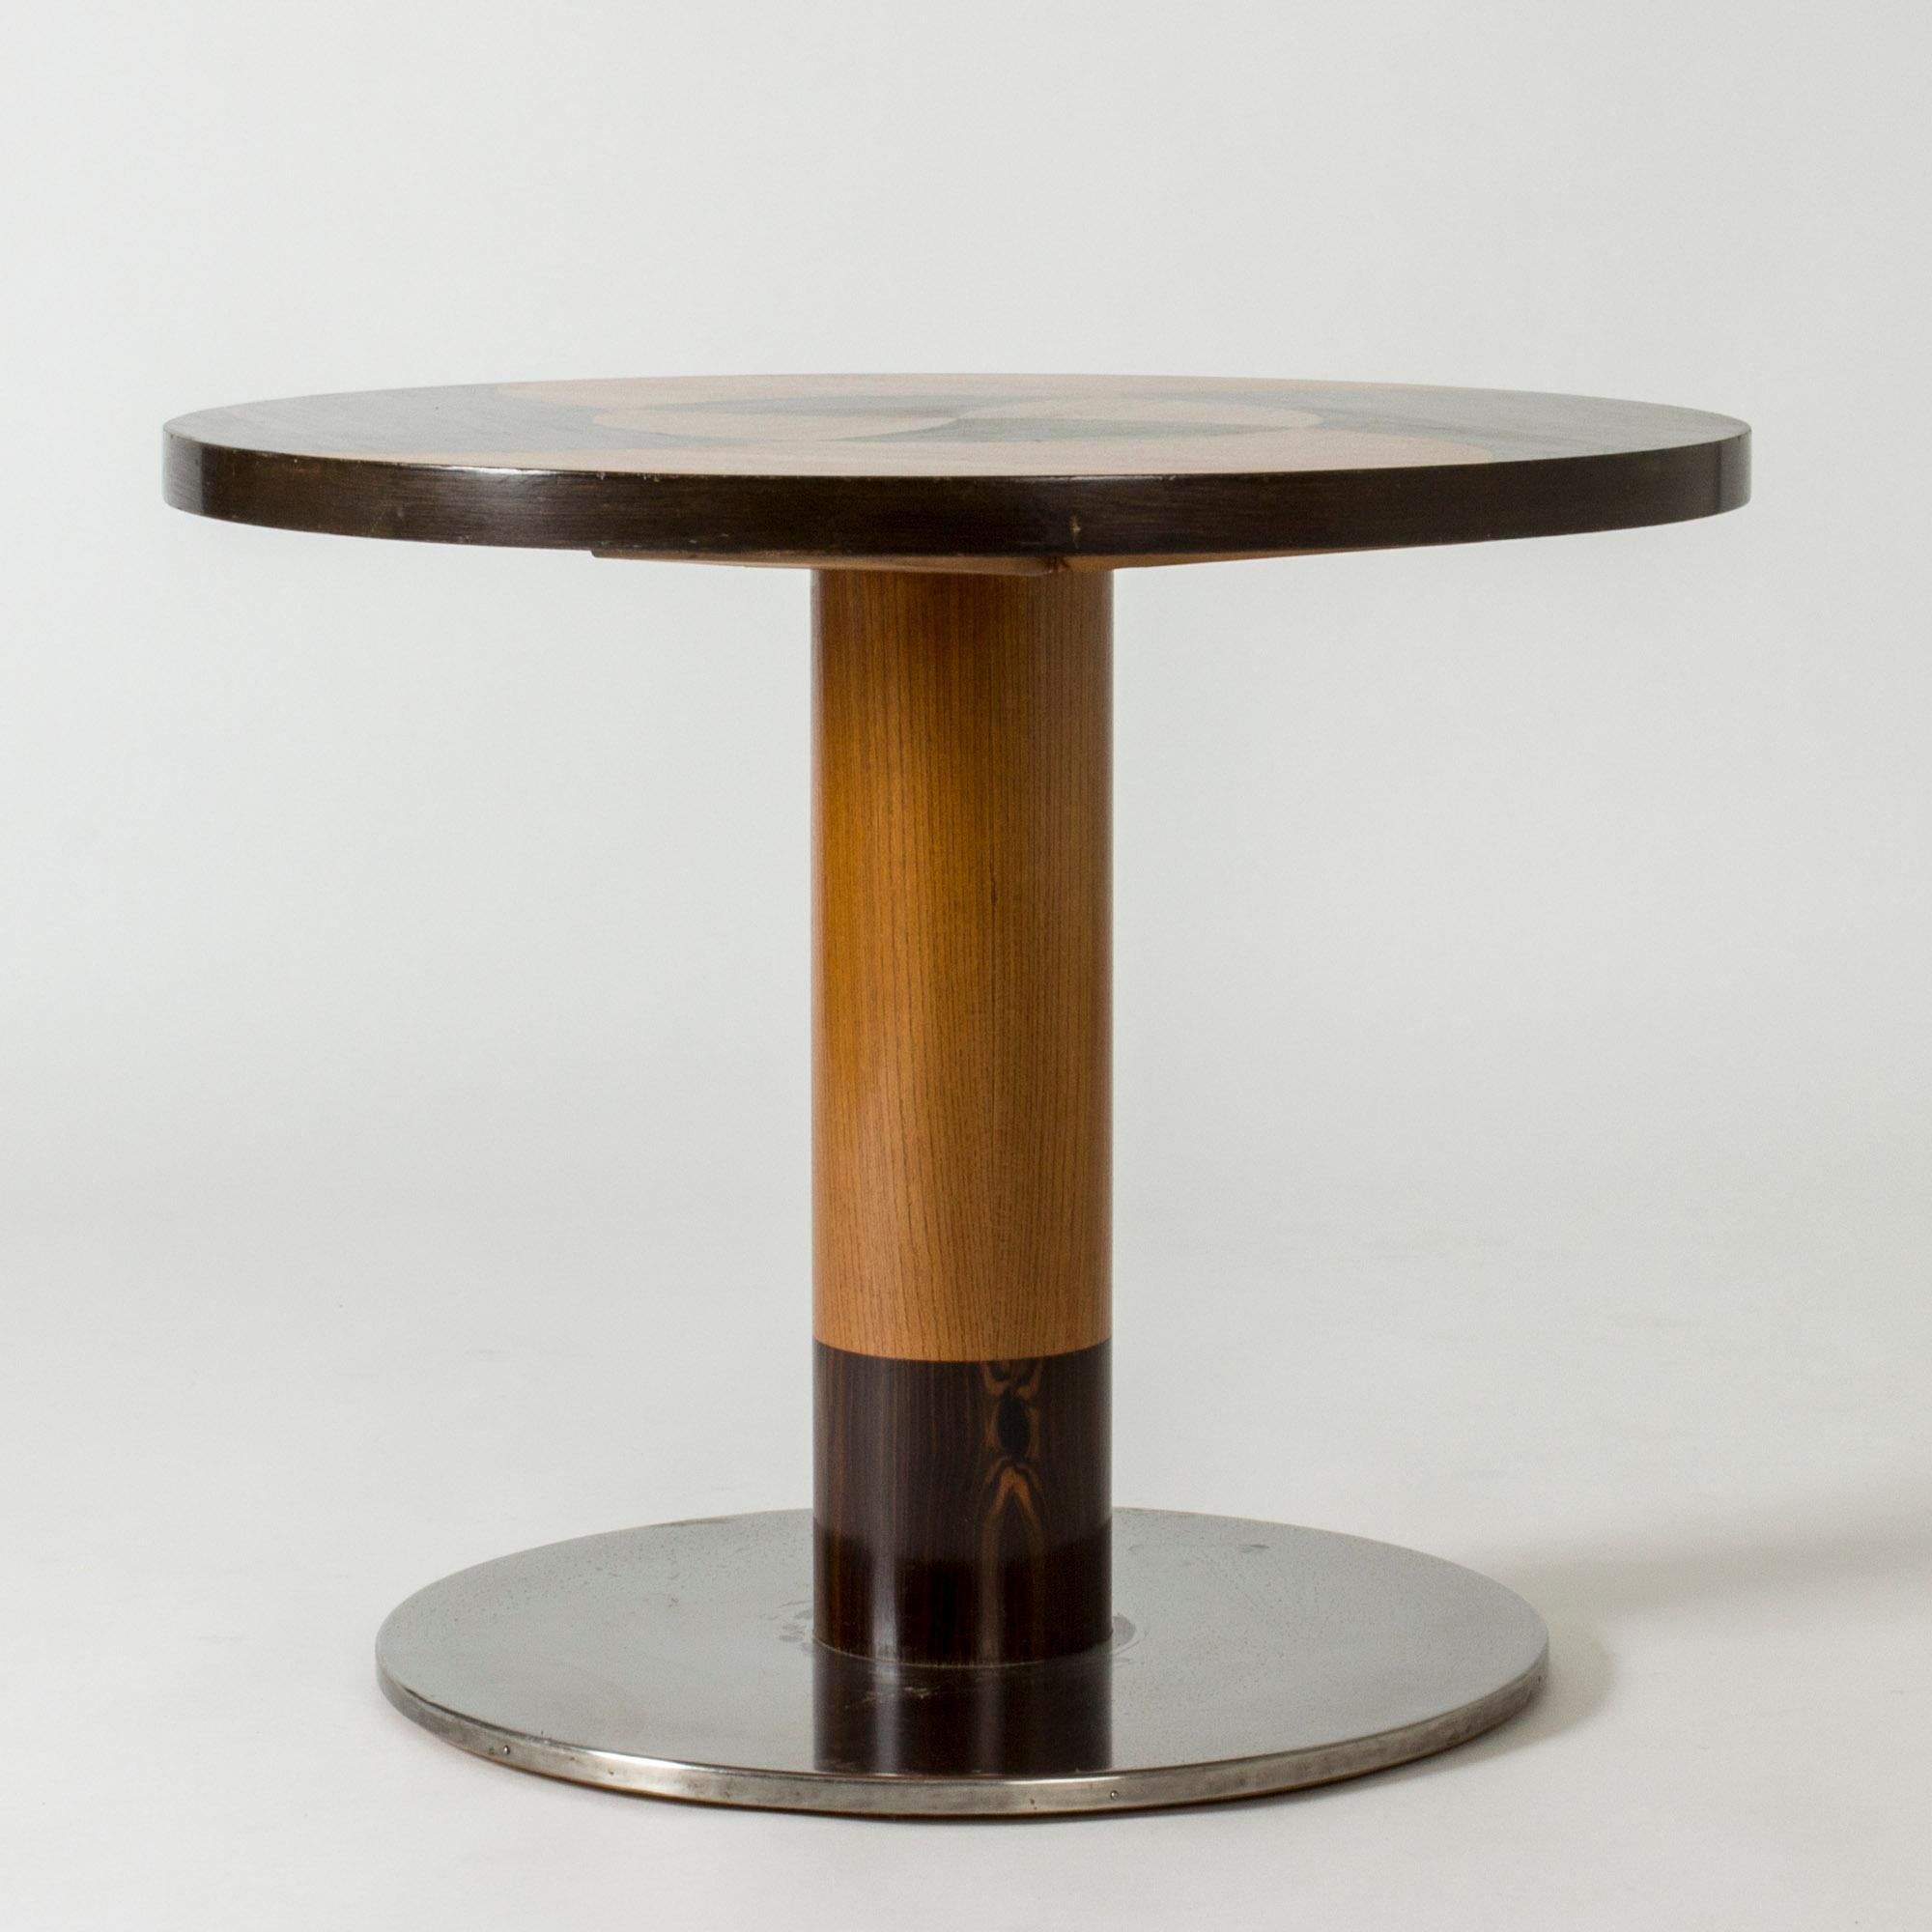 Coffee or occasional table by Otto Schulz, in a sleek round form. Made from wood with a steel base. Striking graphic inlays in different colored wood.